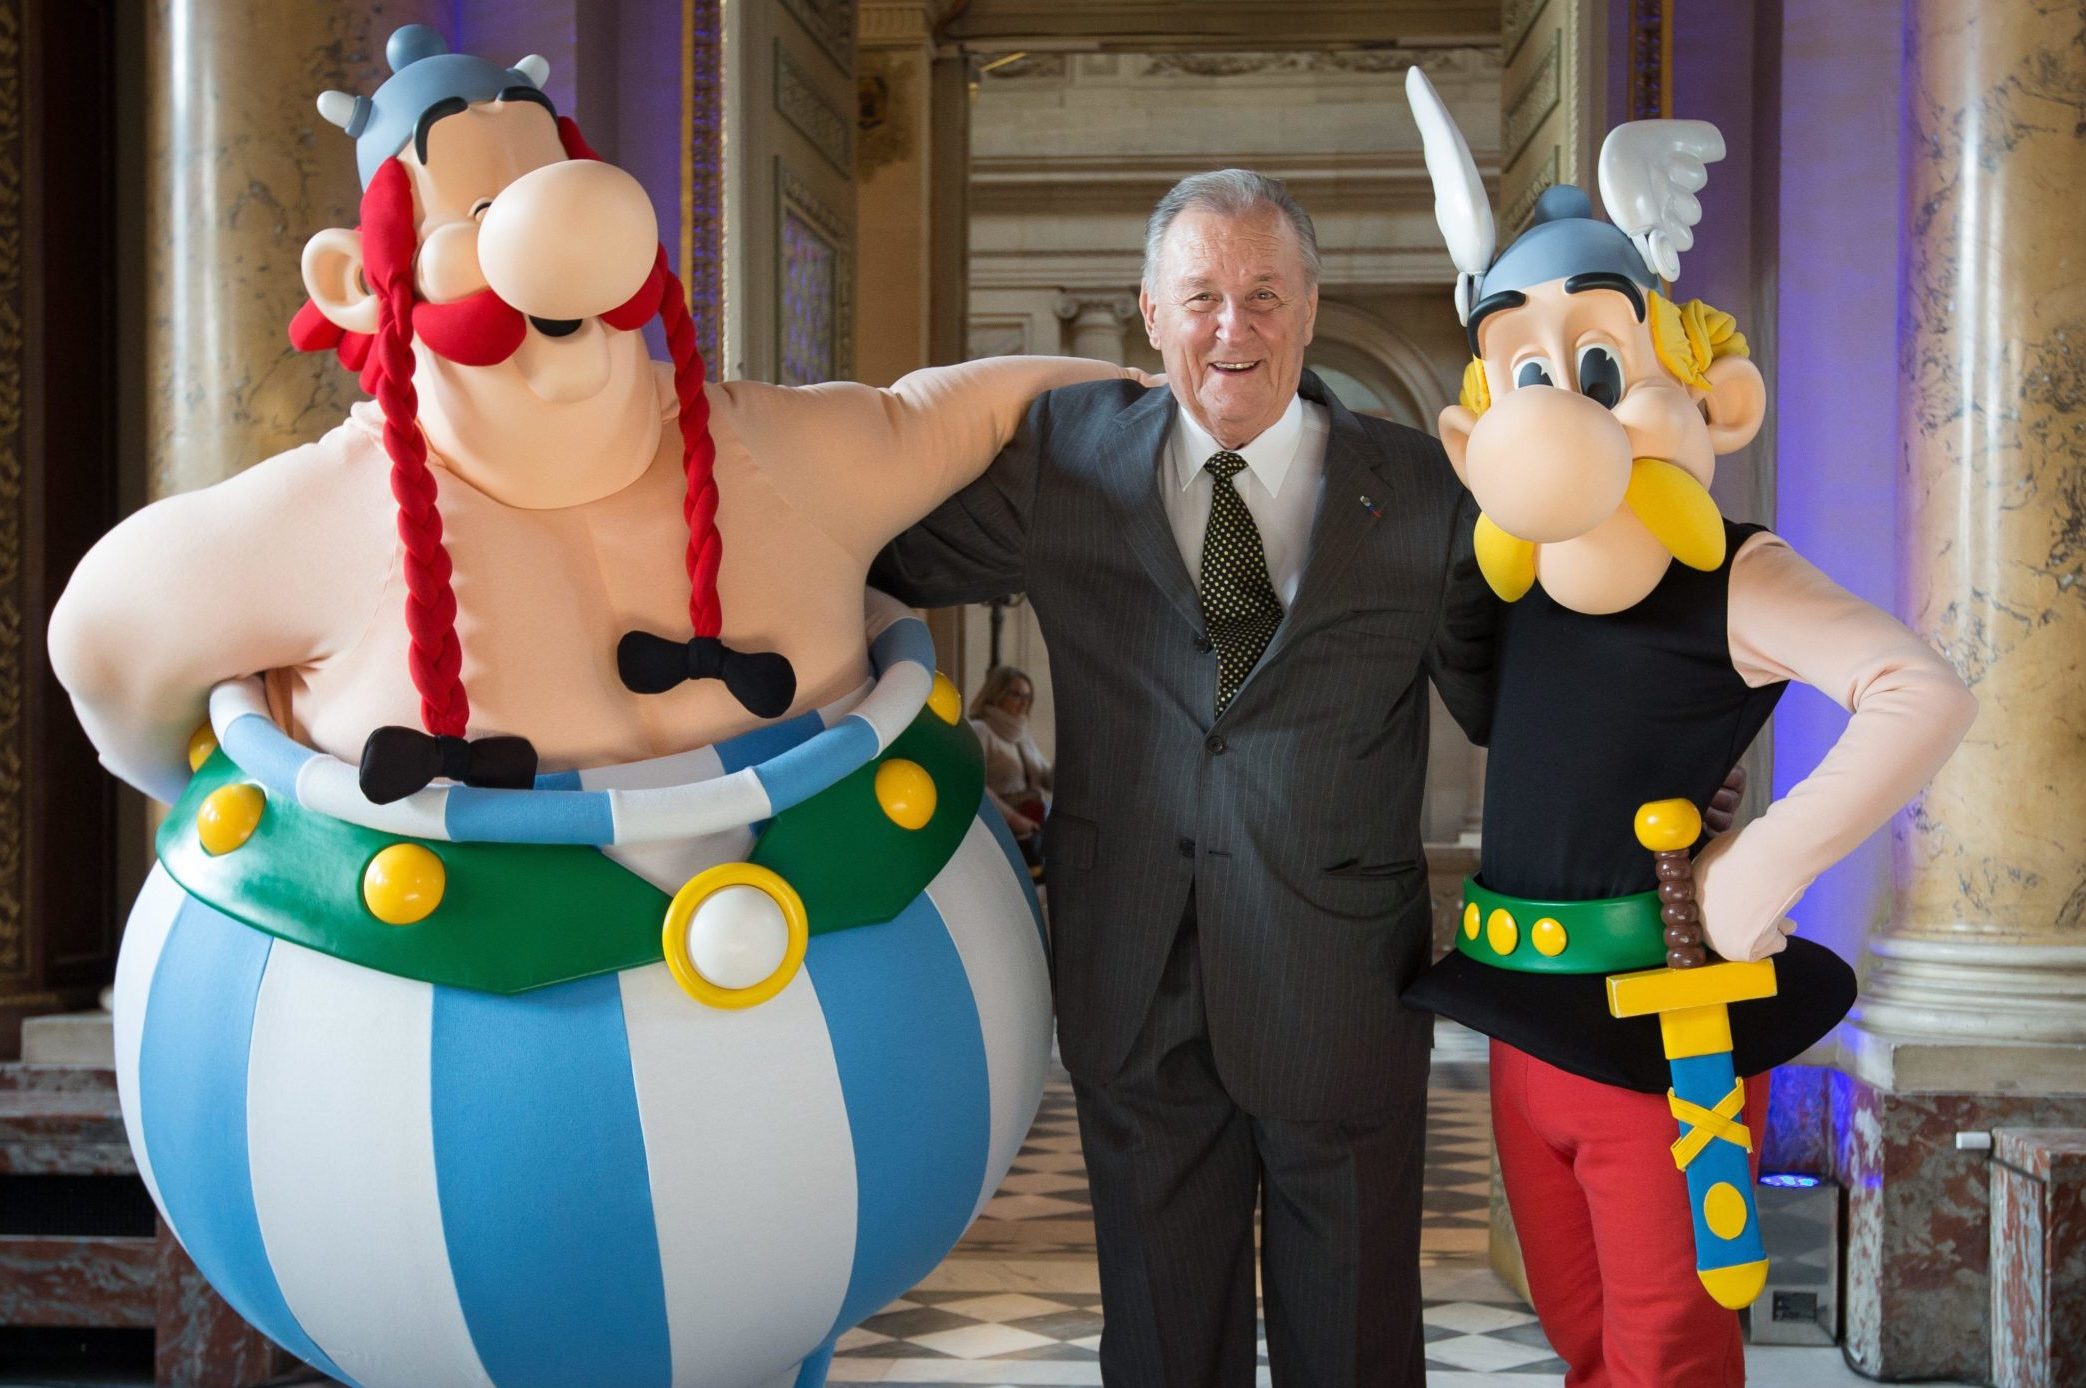 Illustrator Albert Uderzo with cosplayers as his much-loved characters Obelix and Asterix in Paris in 2015